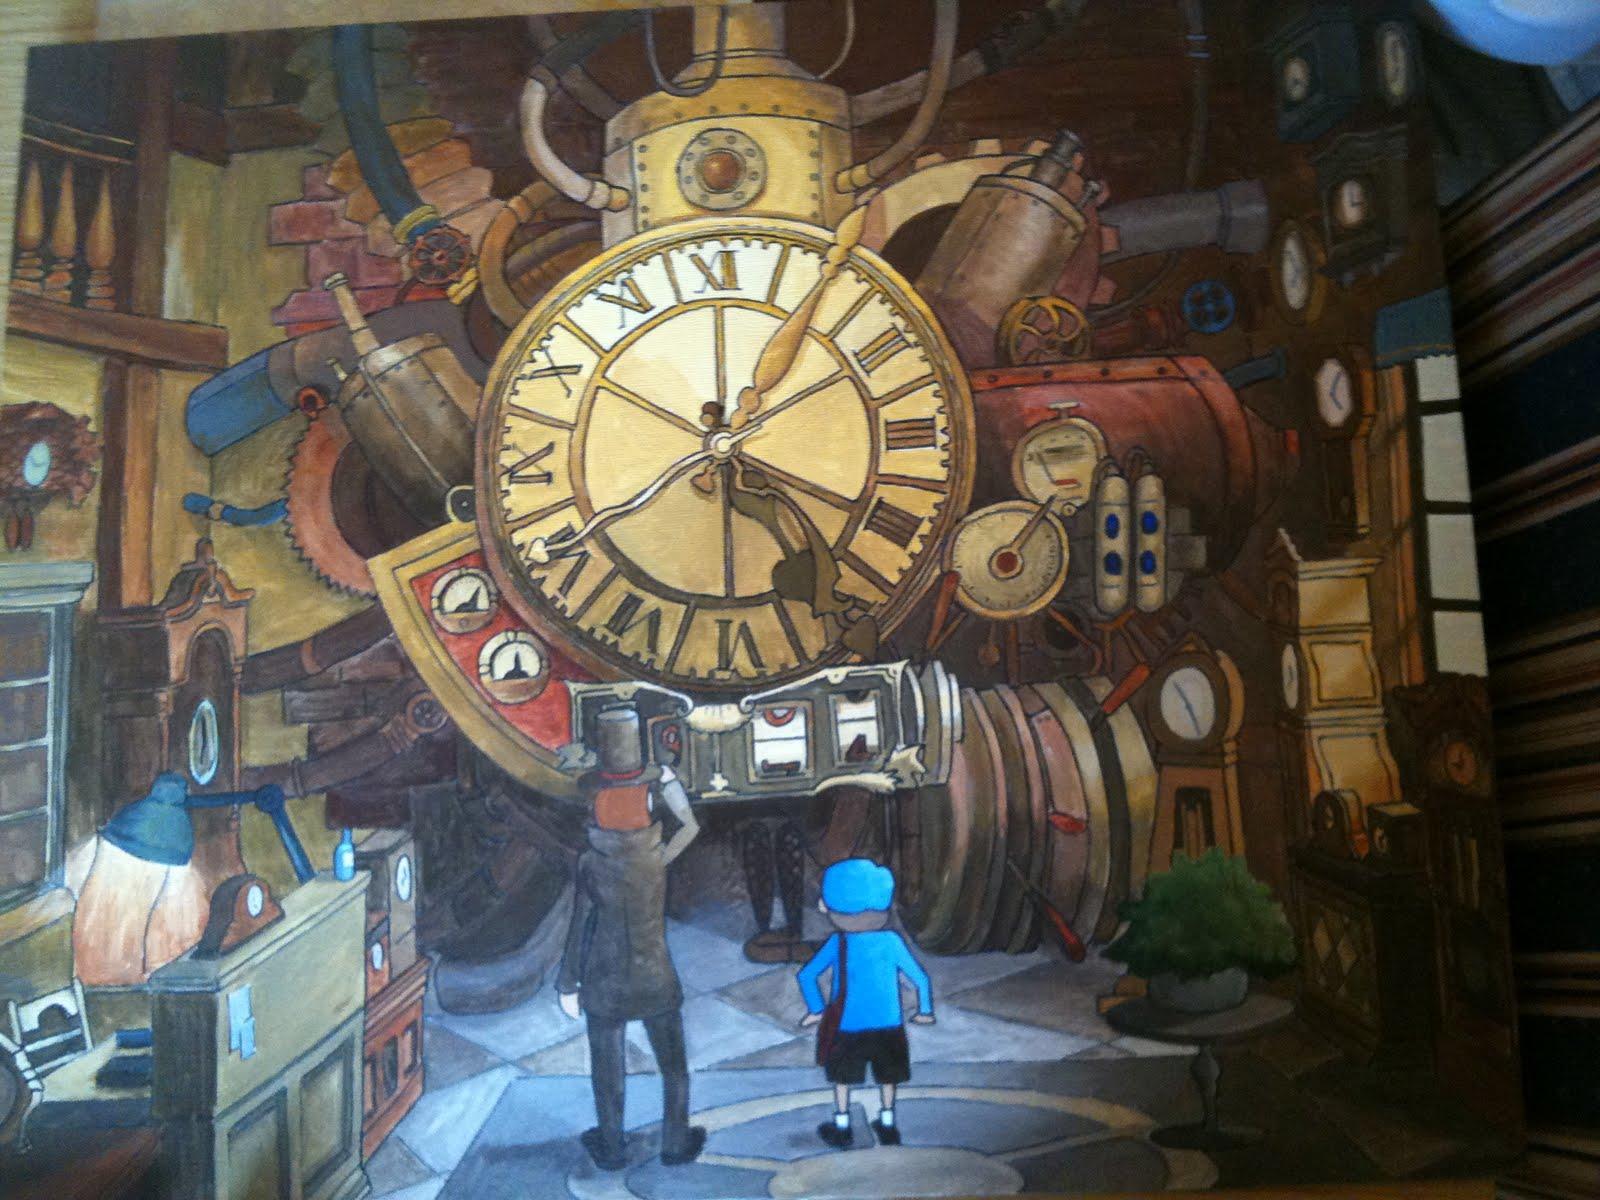 canvas and paints: Professor Layton is finished!